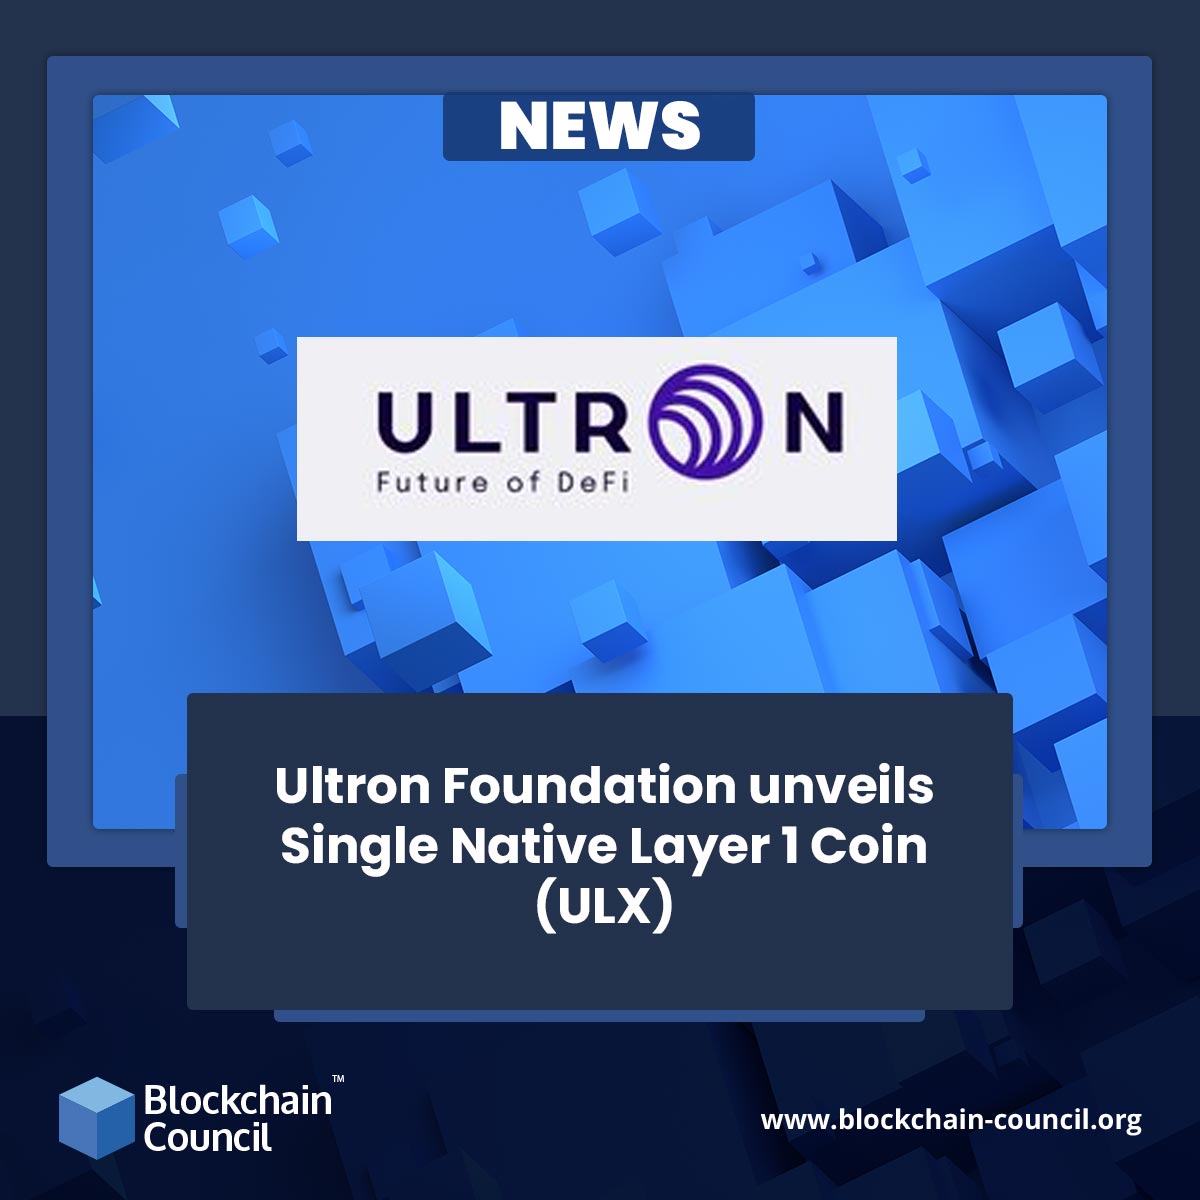 Ultron Foundation unveils Single Native Layer 1 Coin (ULX)